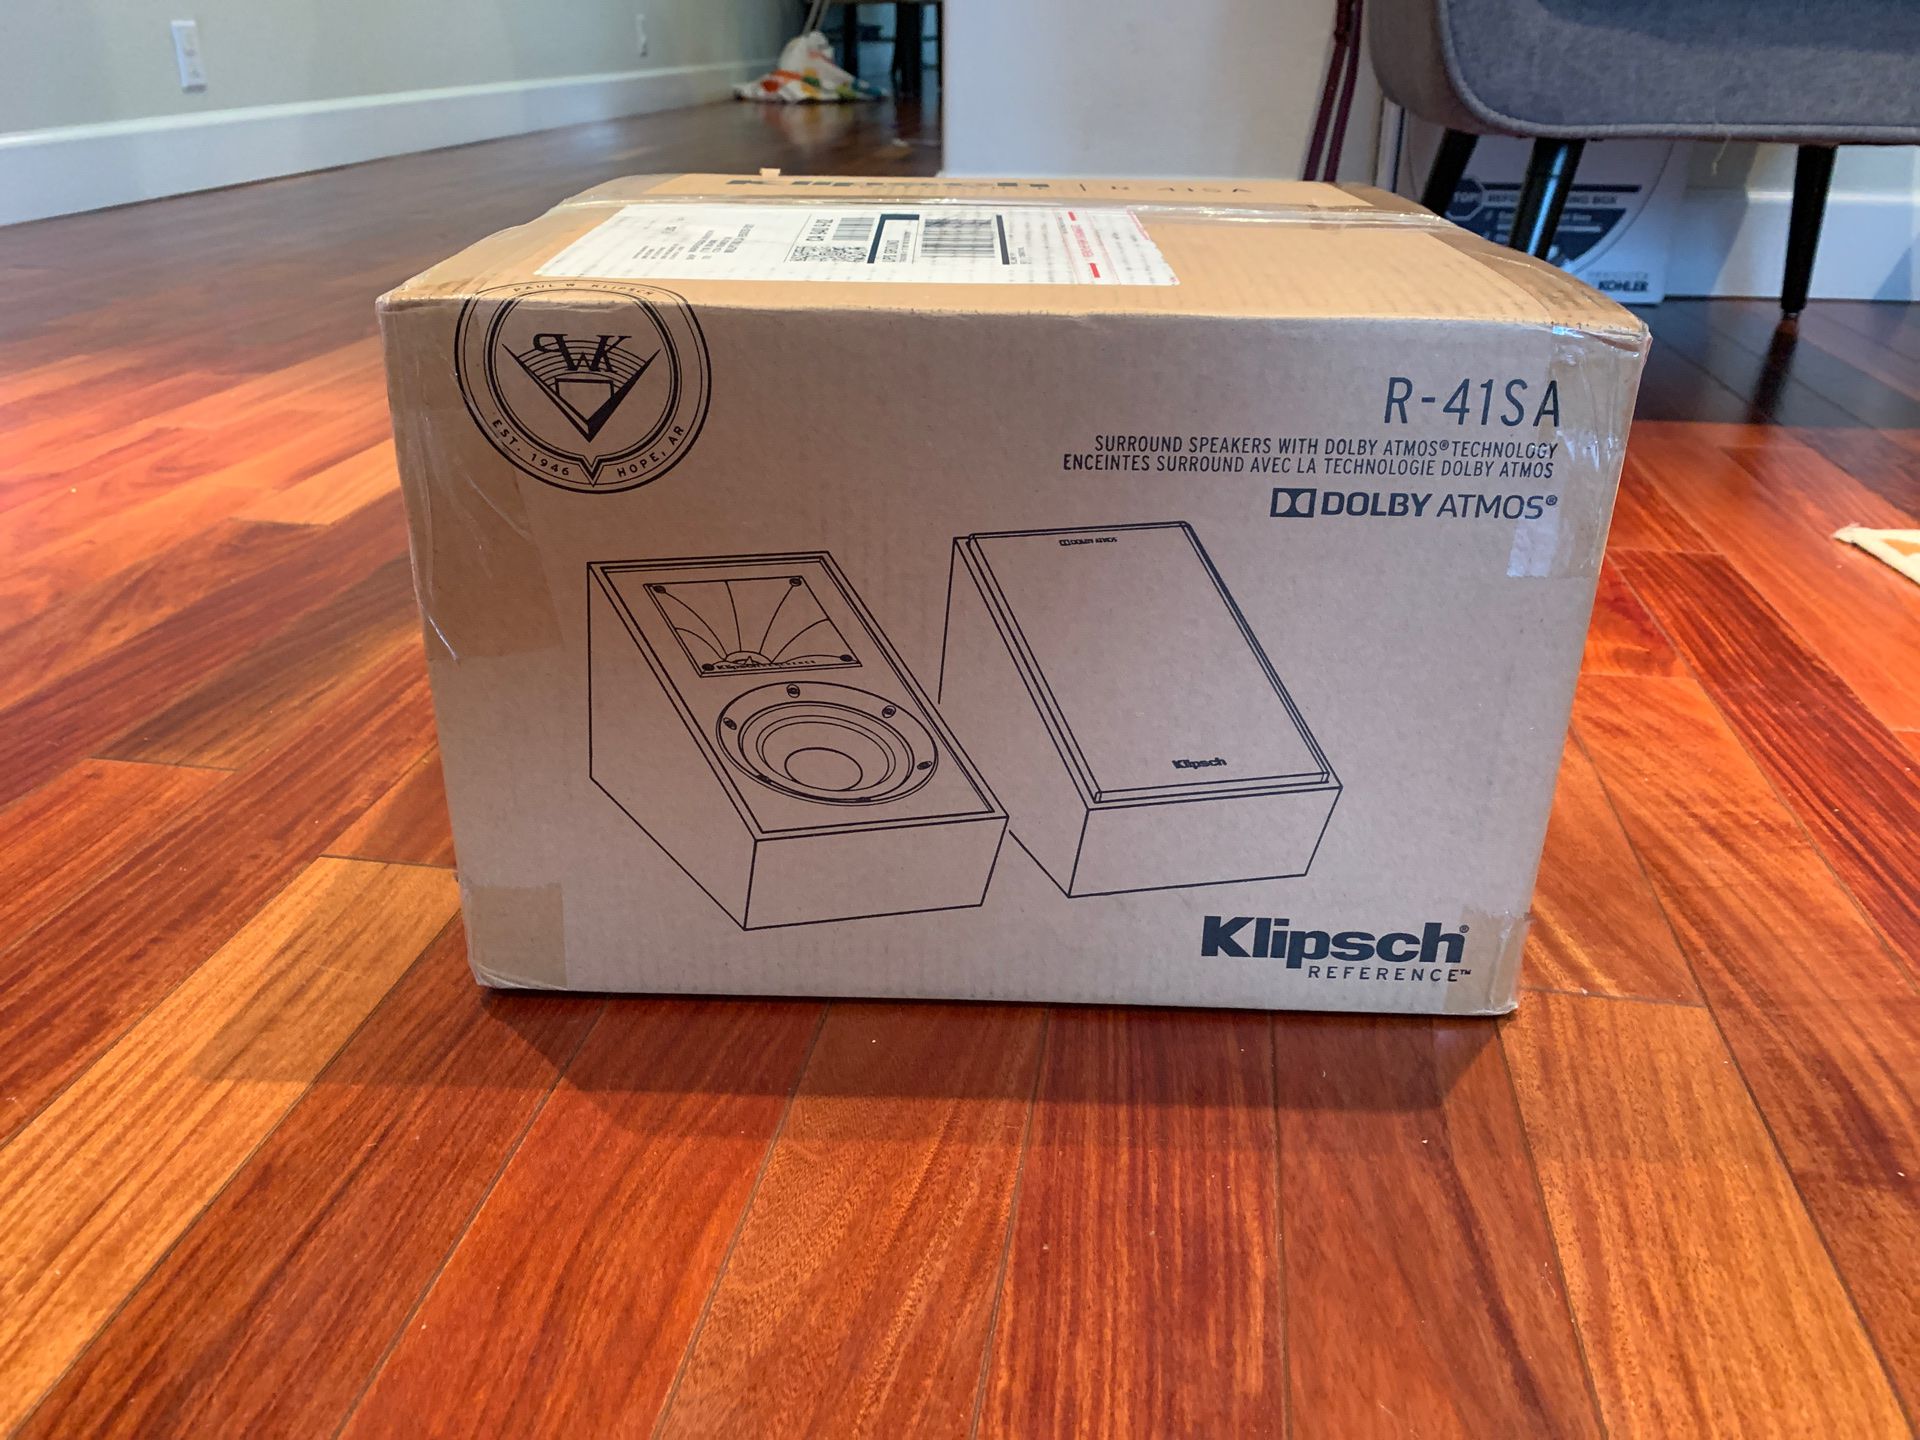 Klipsch Surround / Dolby Atmos New in Box Unopened (395$ ask, sells for 459$+tax)